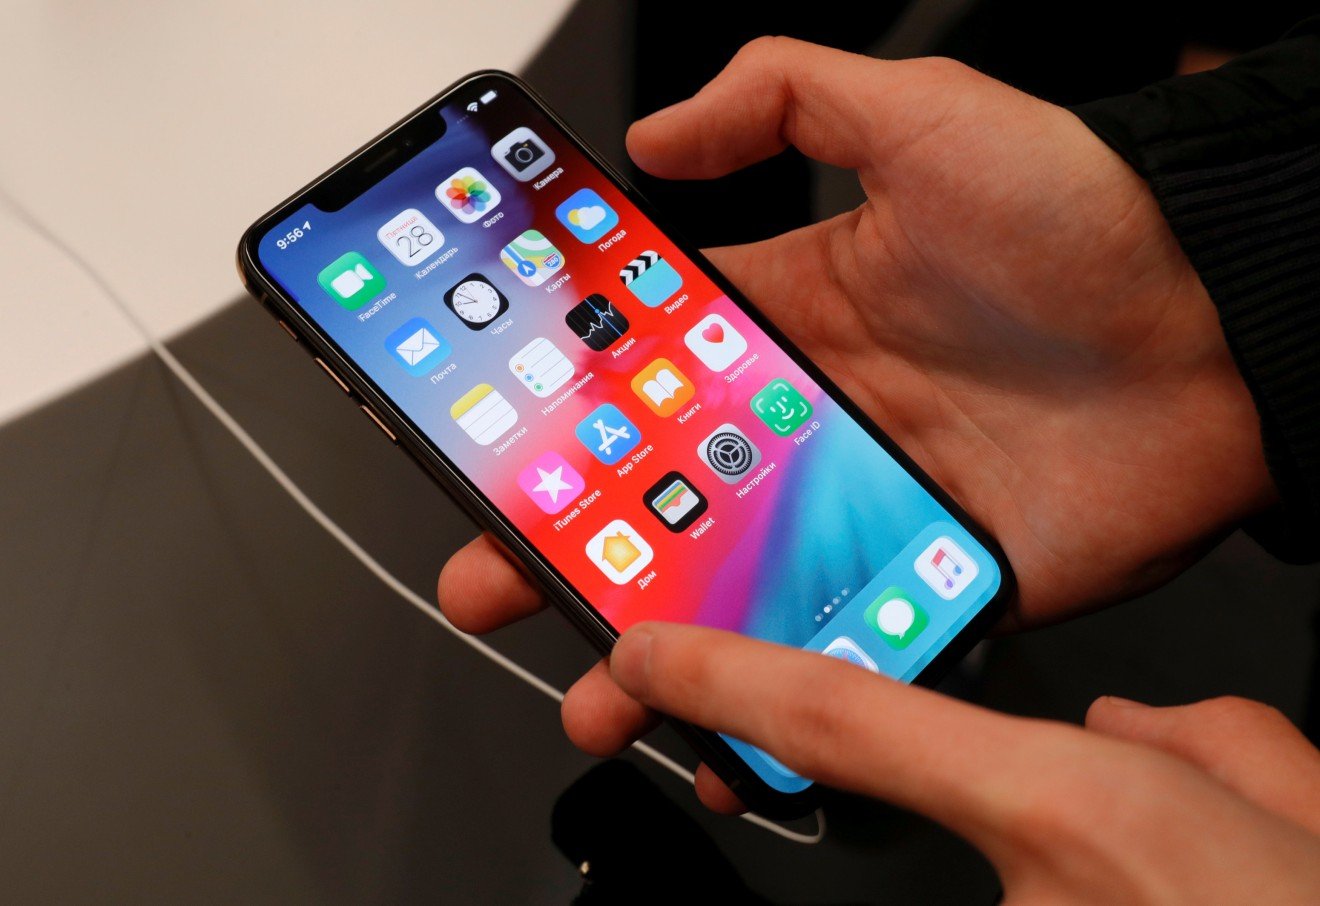 In a survey conducted in August by the CCA, nearly 70% of respondents said that mobile apps request access to private data even though their functions do not require it. (Picture:  REUTERS/Tatyana Makeyeva)